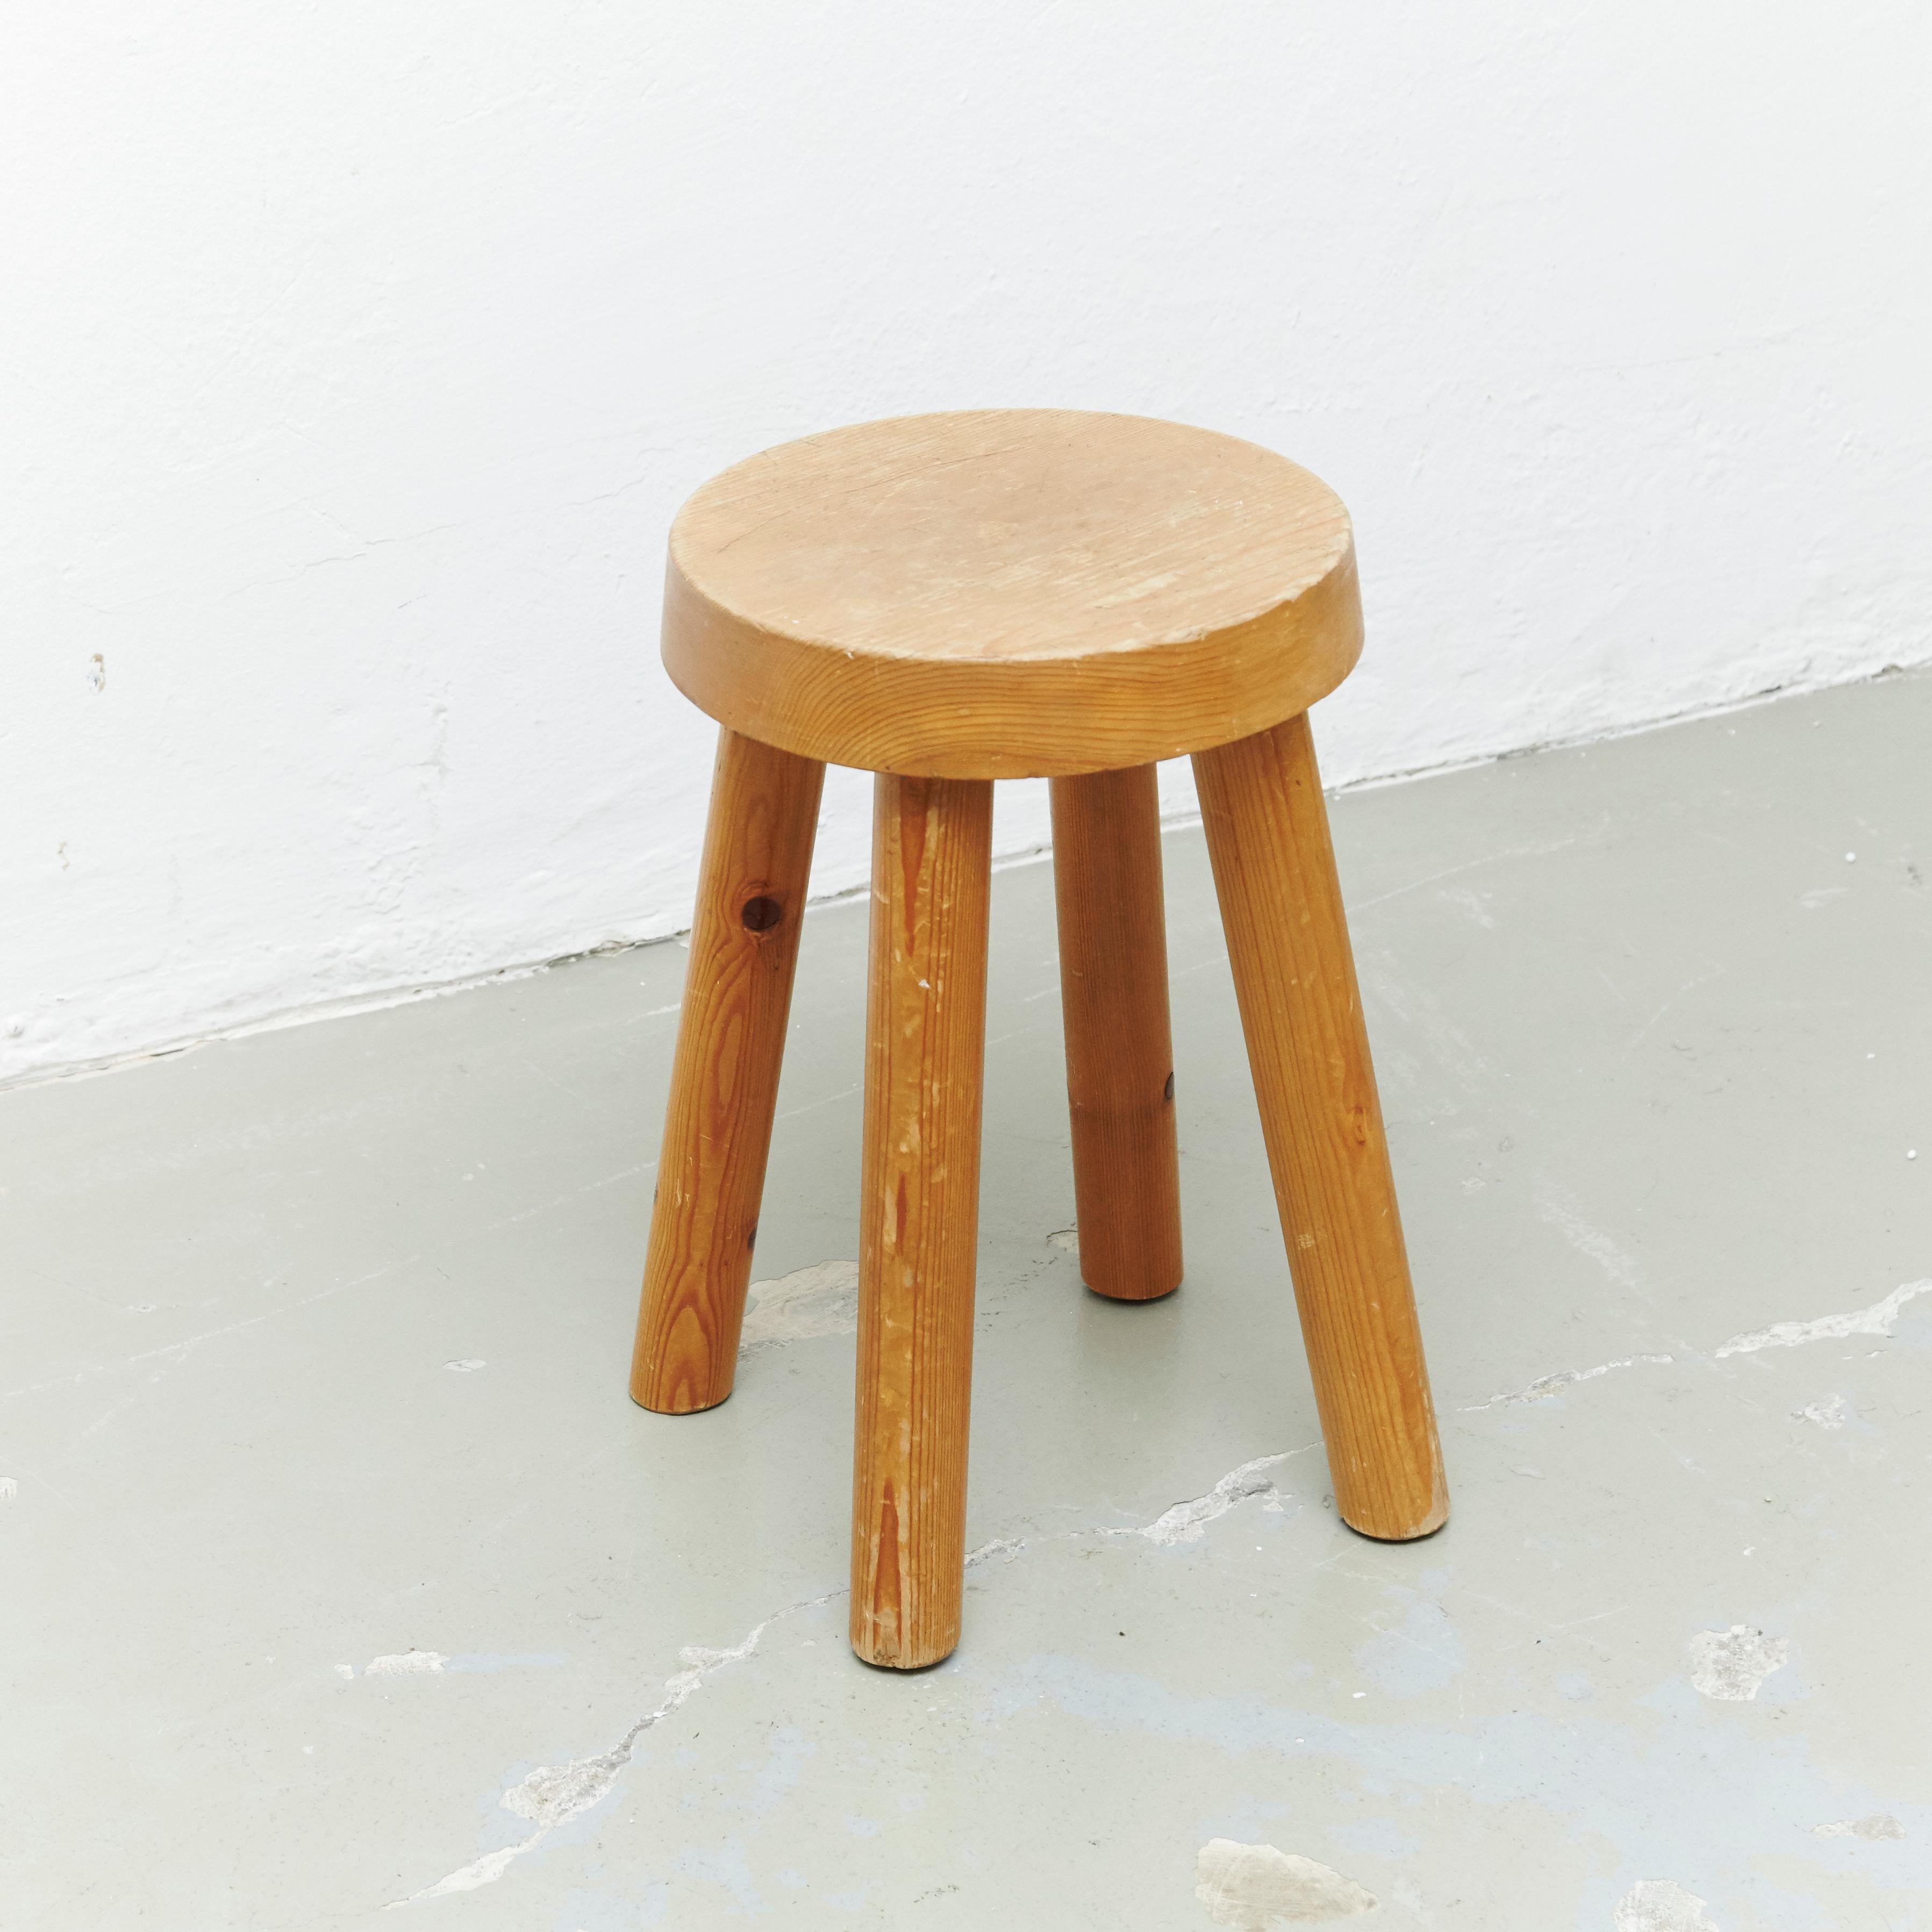 Stool designed by Charlotte Perriand, circa 1960 for Les Arcs.
Manufactured in France.

In good original condition, preserving a beautiful patina. 

Charlotte Perriand (1903-1999) She was born in Paris in 1903 and attended the E´cole de l'Union